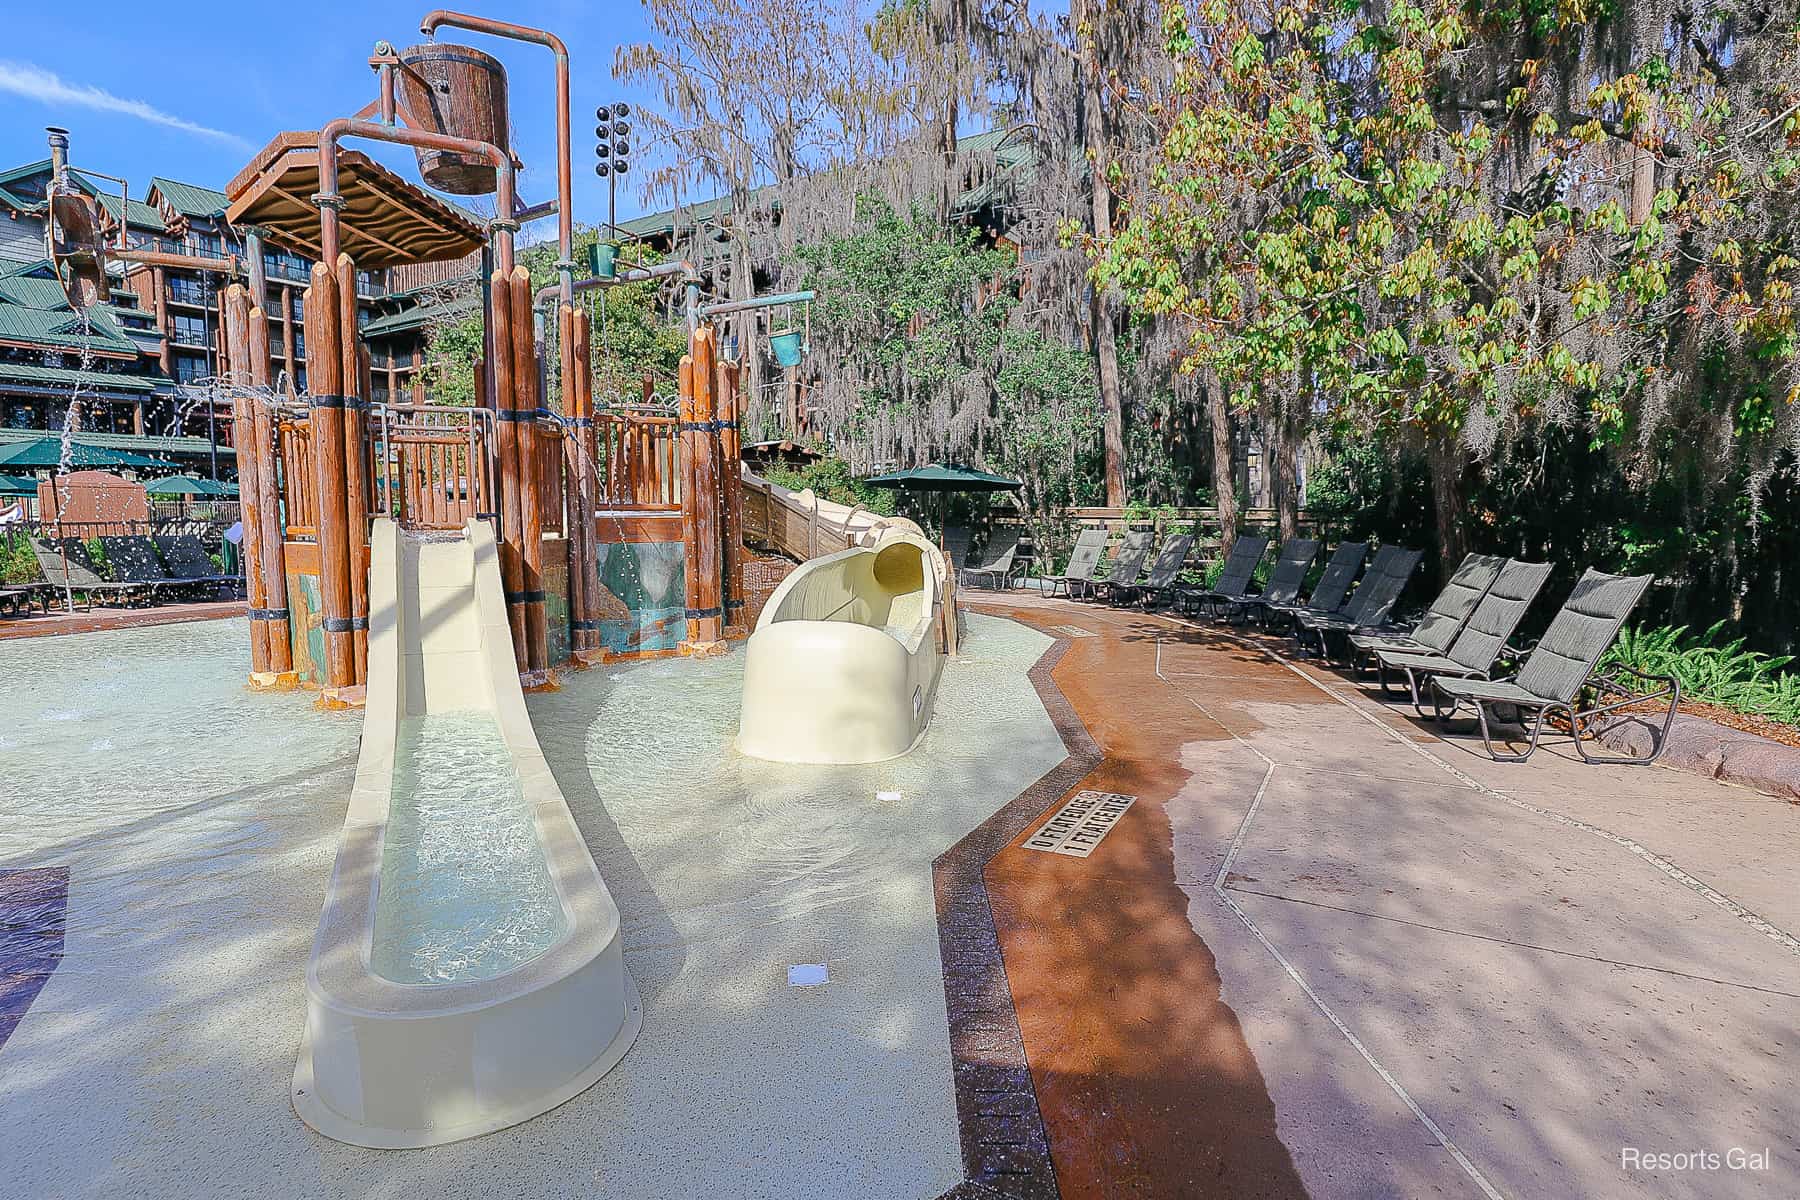 the play area has two small slides 